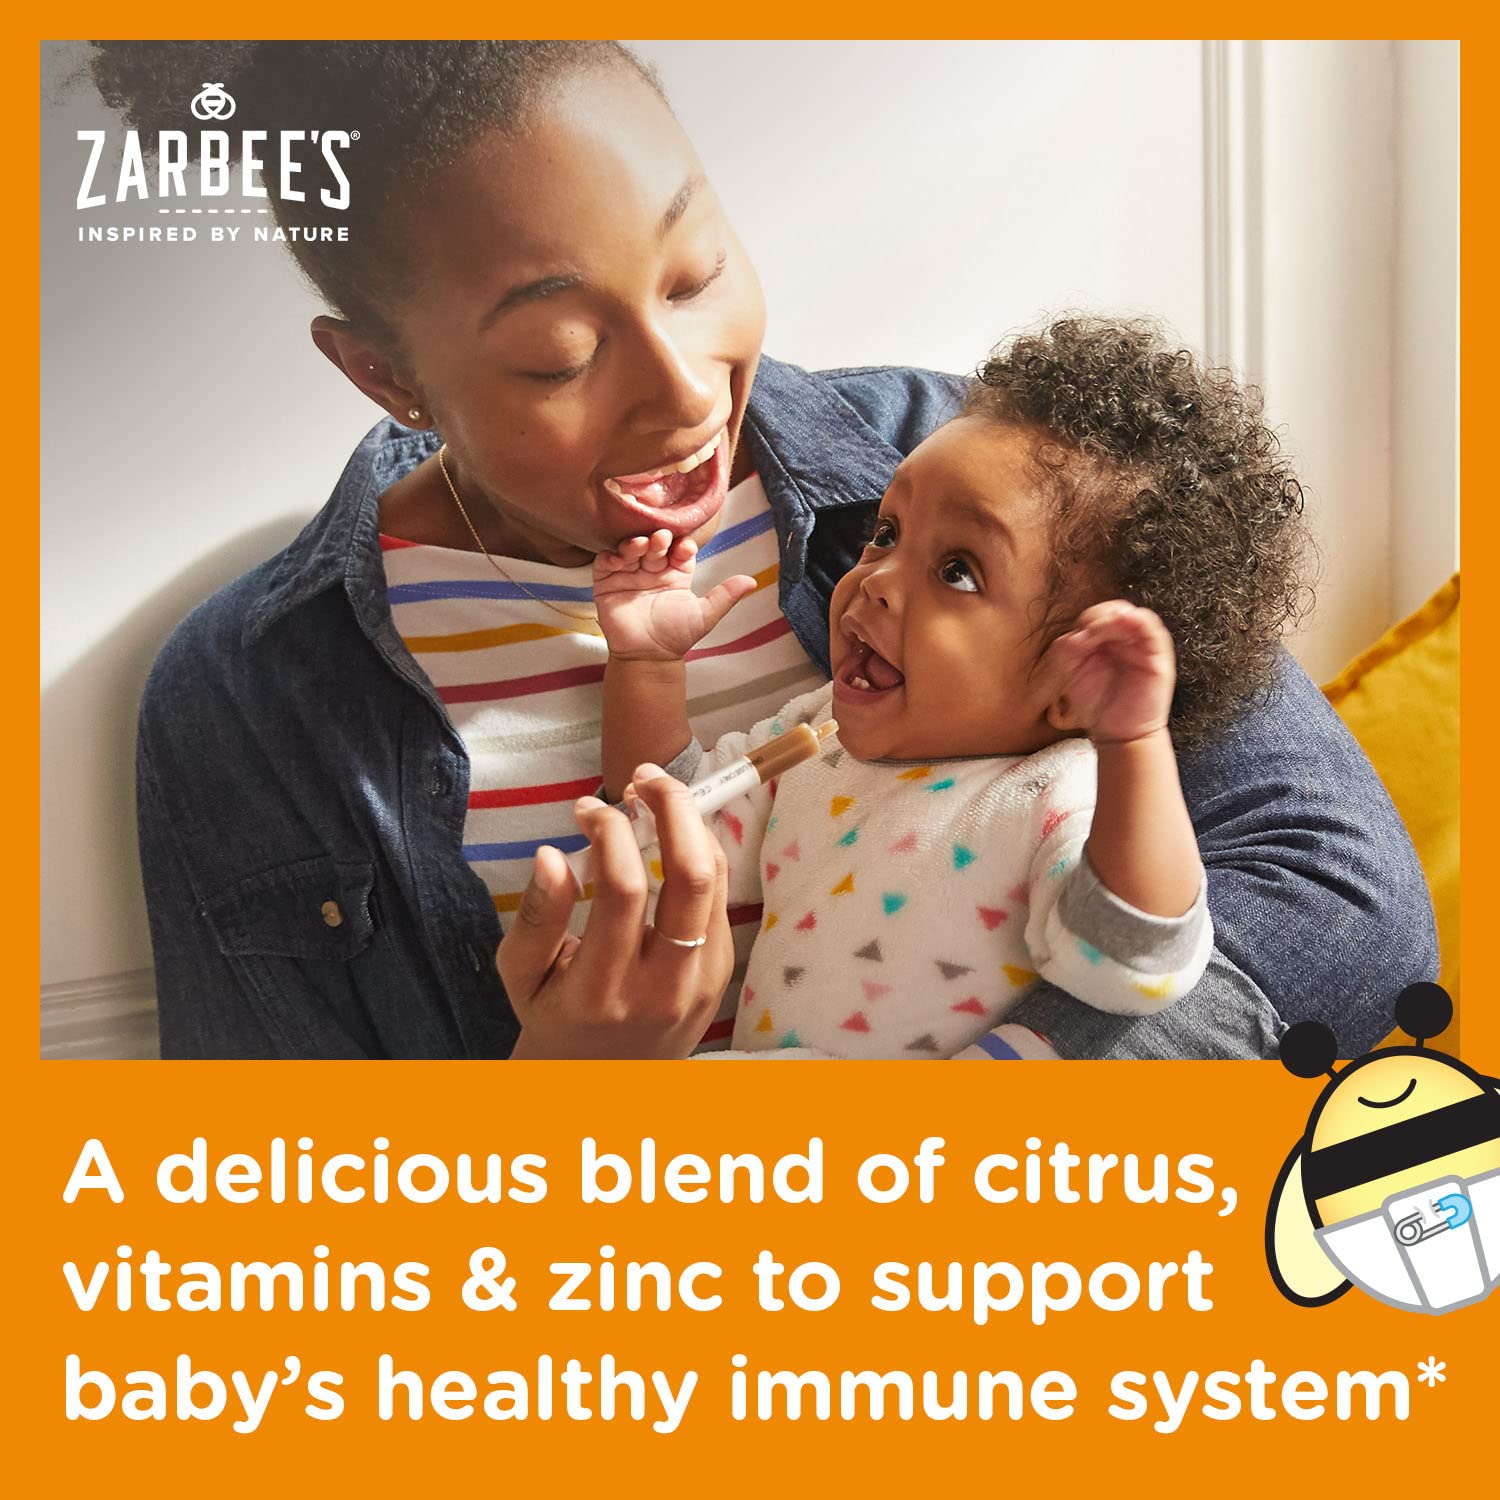 Zarbee's Baby Immune Support* & Vitamins Supplement with a Special Blend of Vitamins, Zinc, and Agave, Natural Orange Flavor, 2 Fl. Ounces (1 Box)